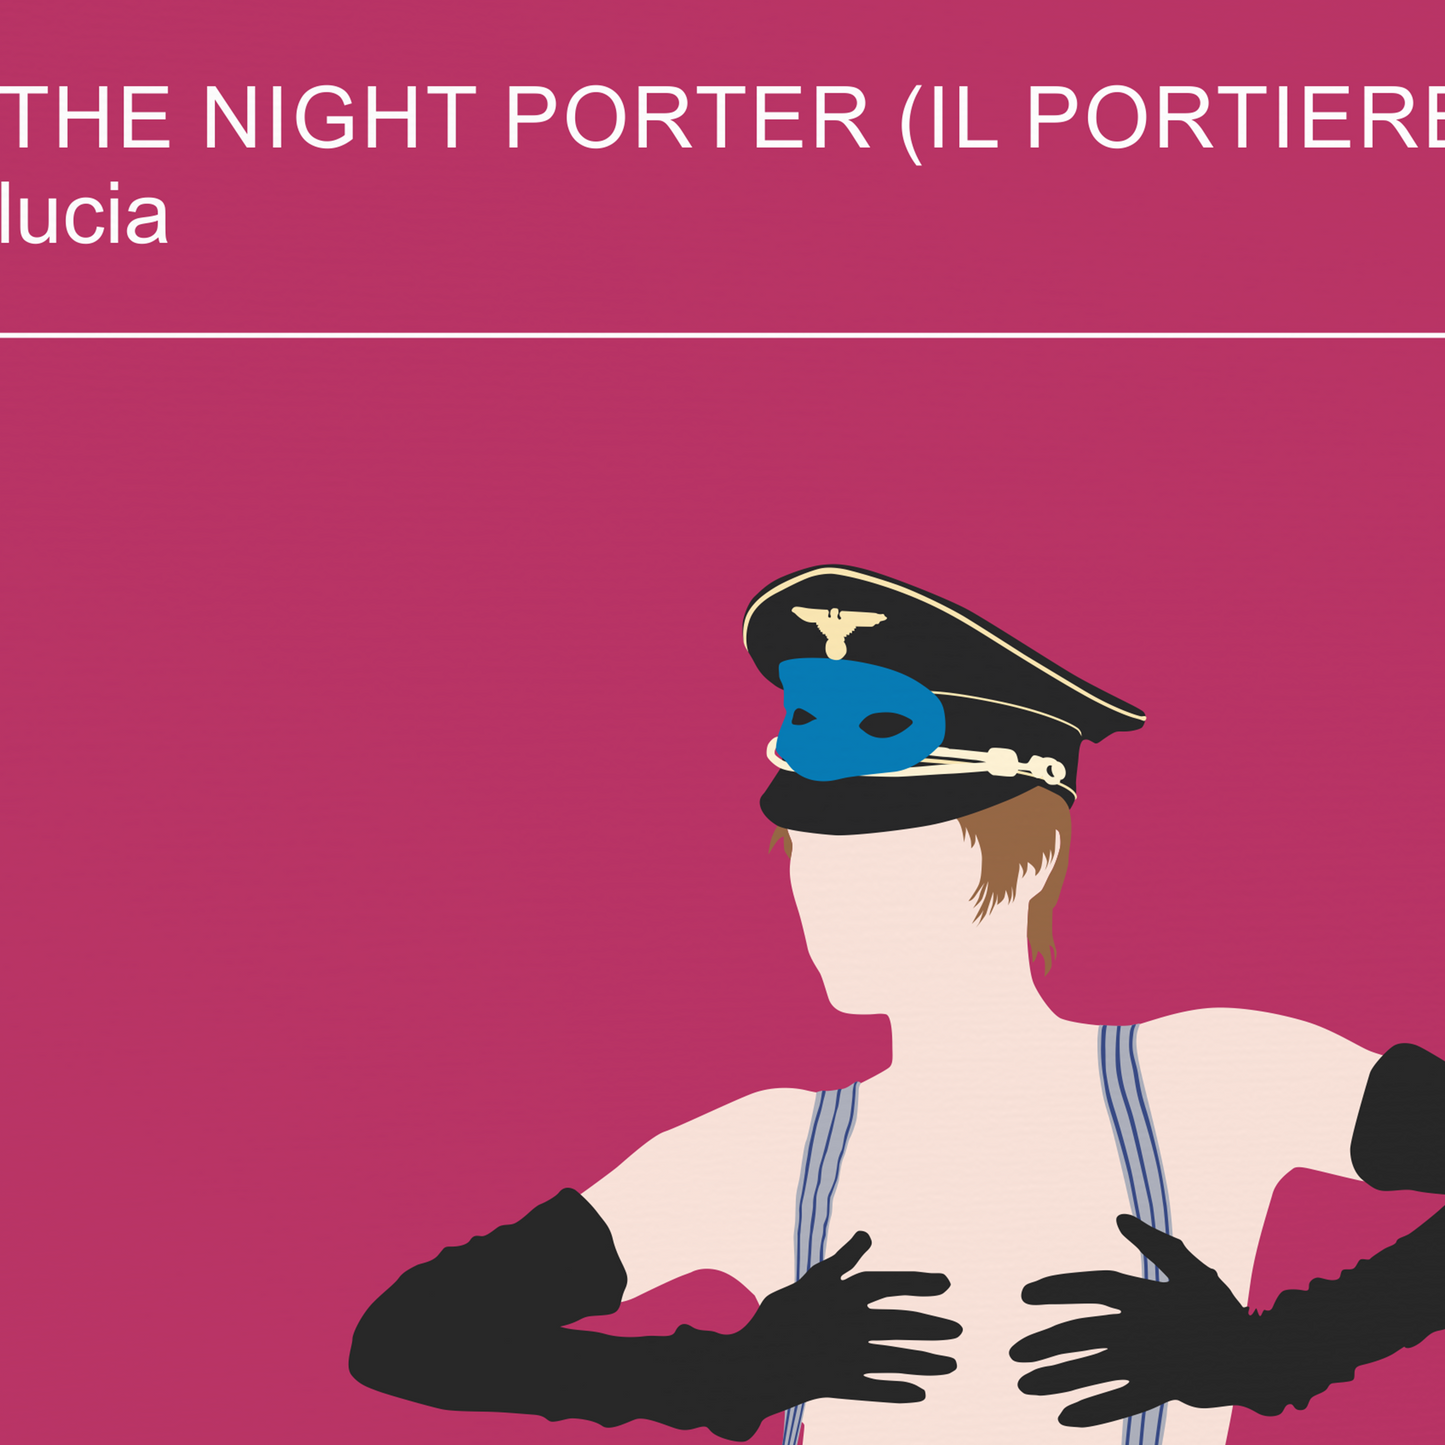 New Item! The Night Porter movie poster, Charlotte Rampling as Lucia